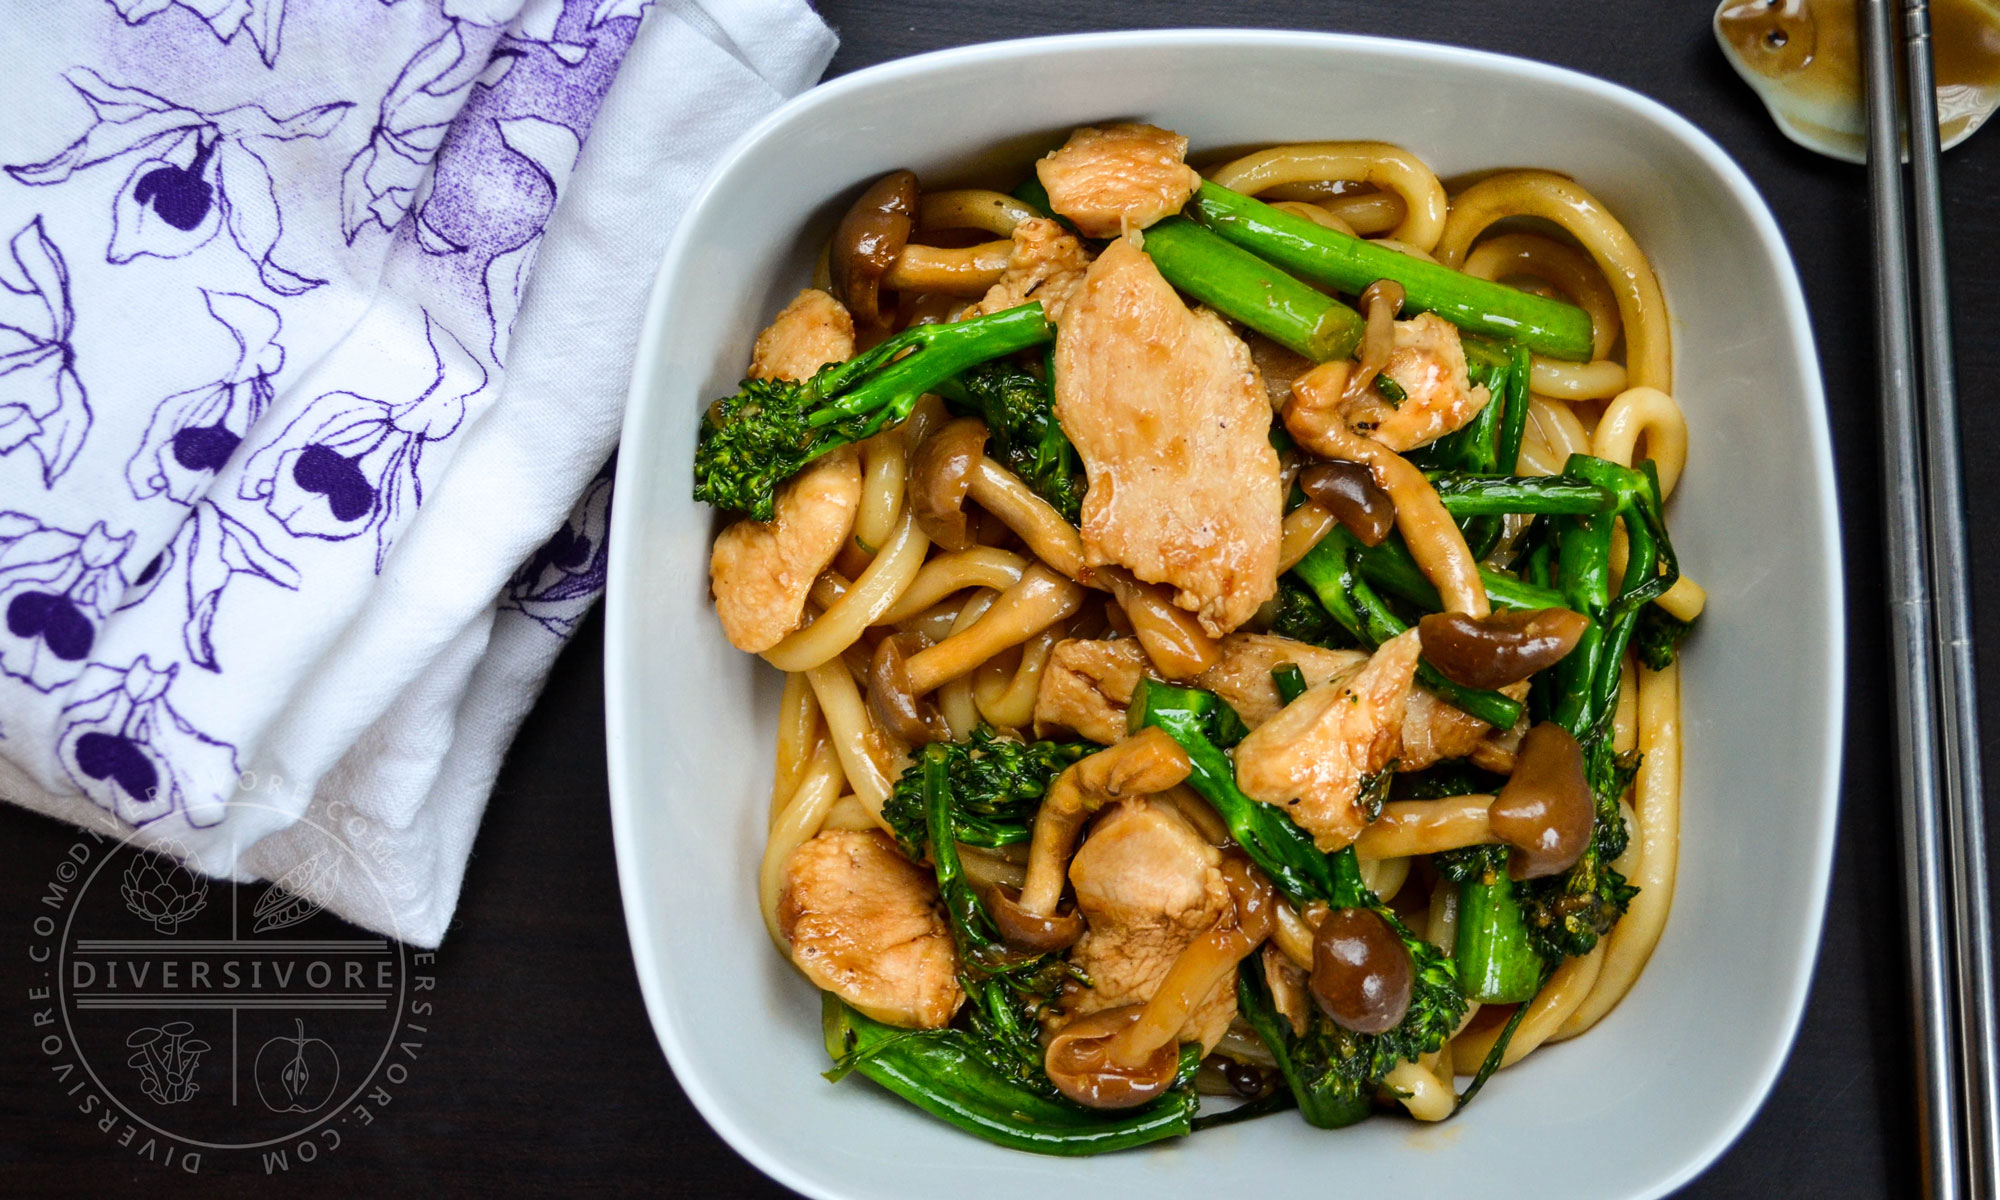 Udon noodles with chicken, broccolini, and shimeji mushrooms